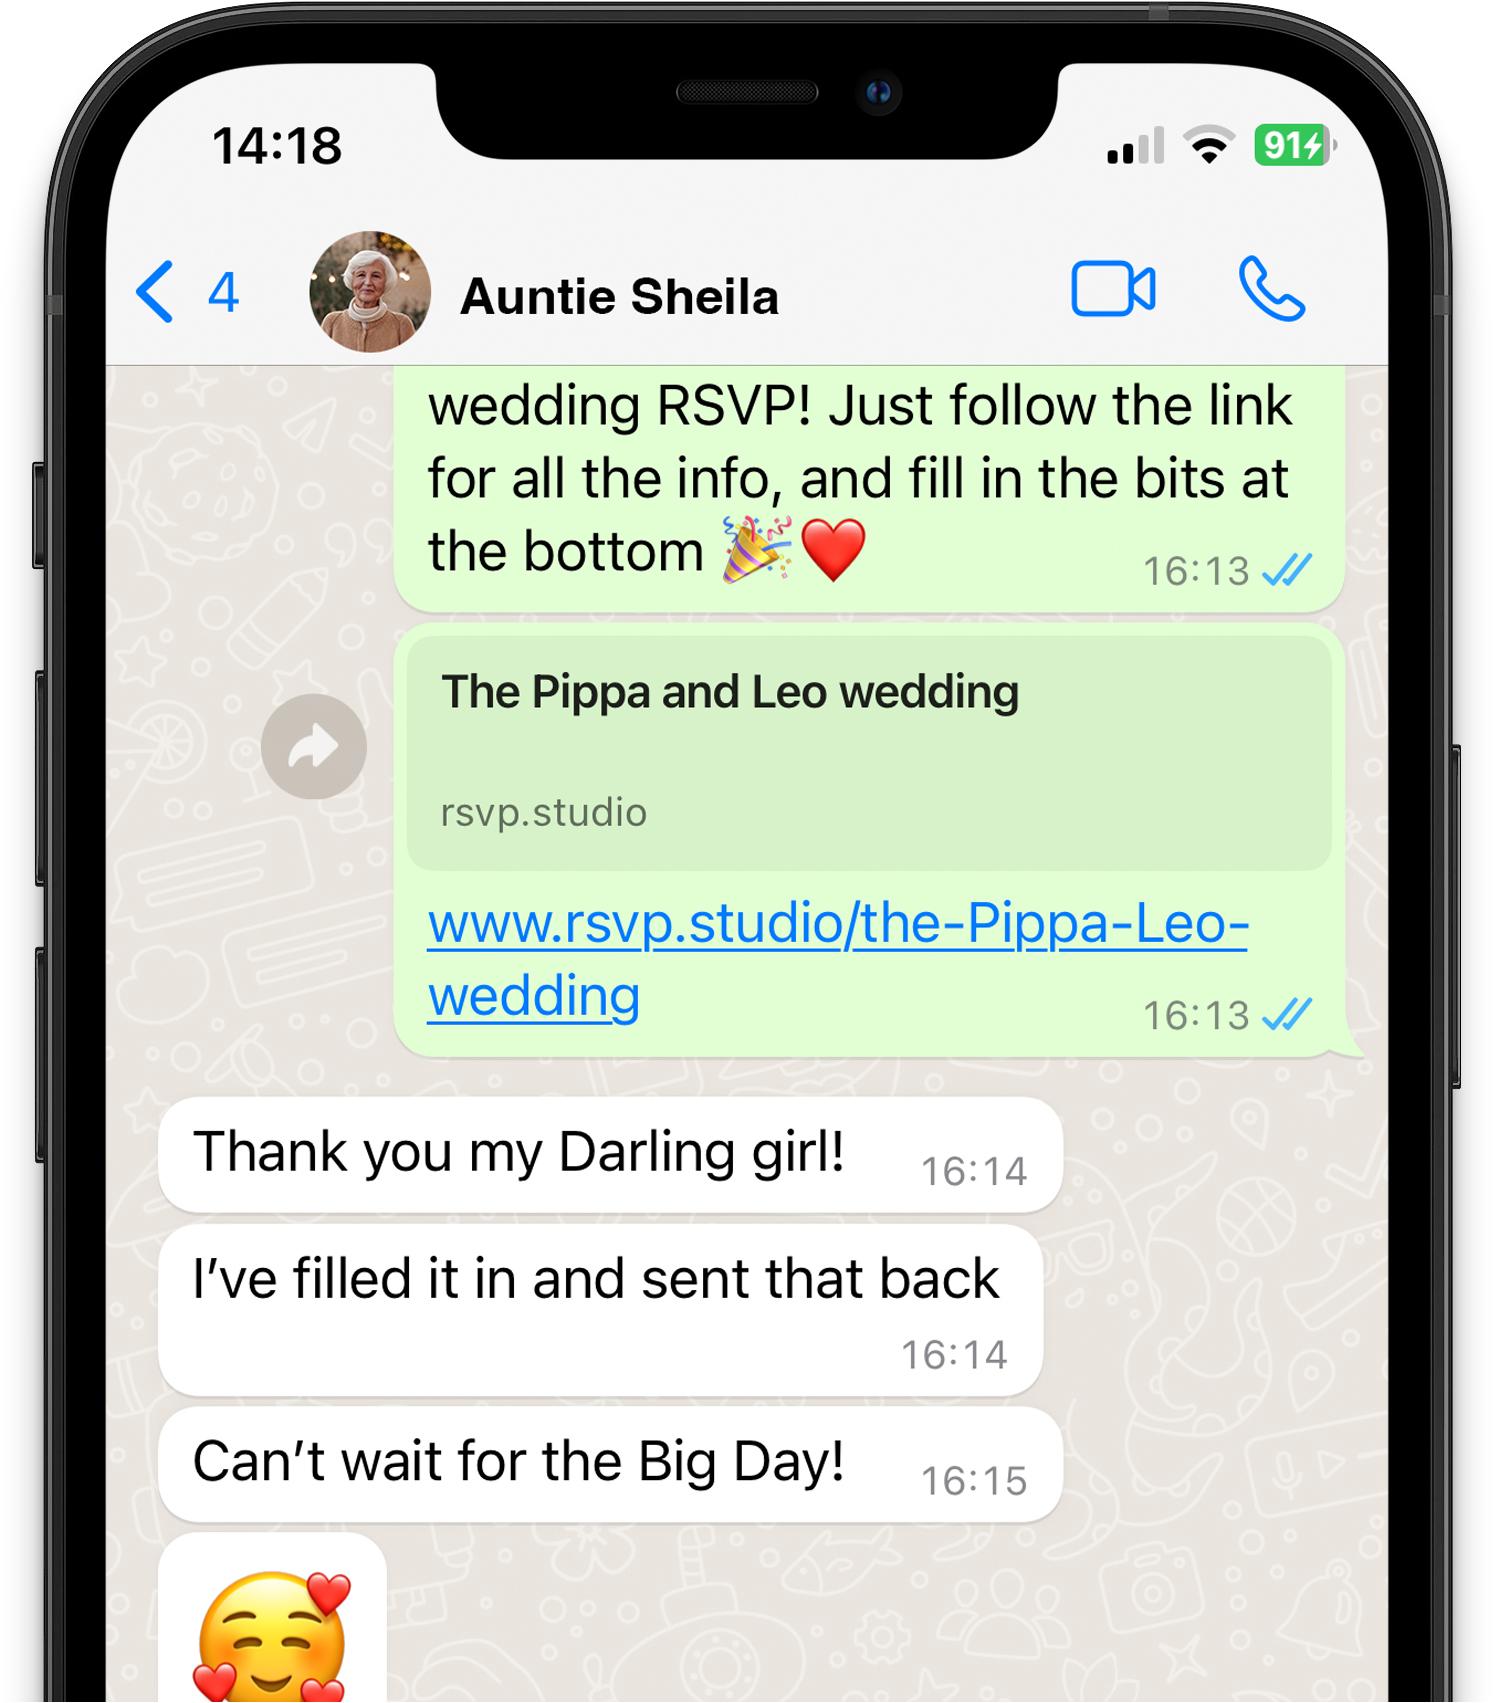 WhatsApp chat screen showing a bride-to-be sending a digital RSVP invitations link for wedding to guest